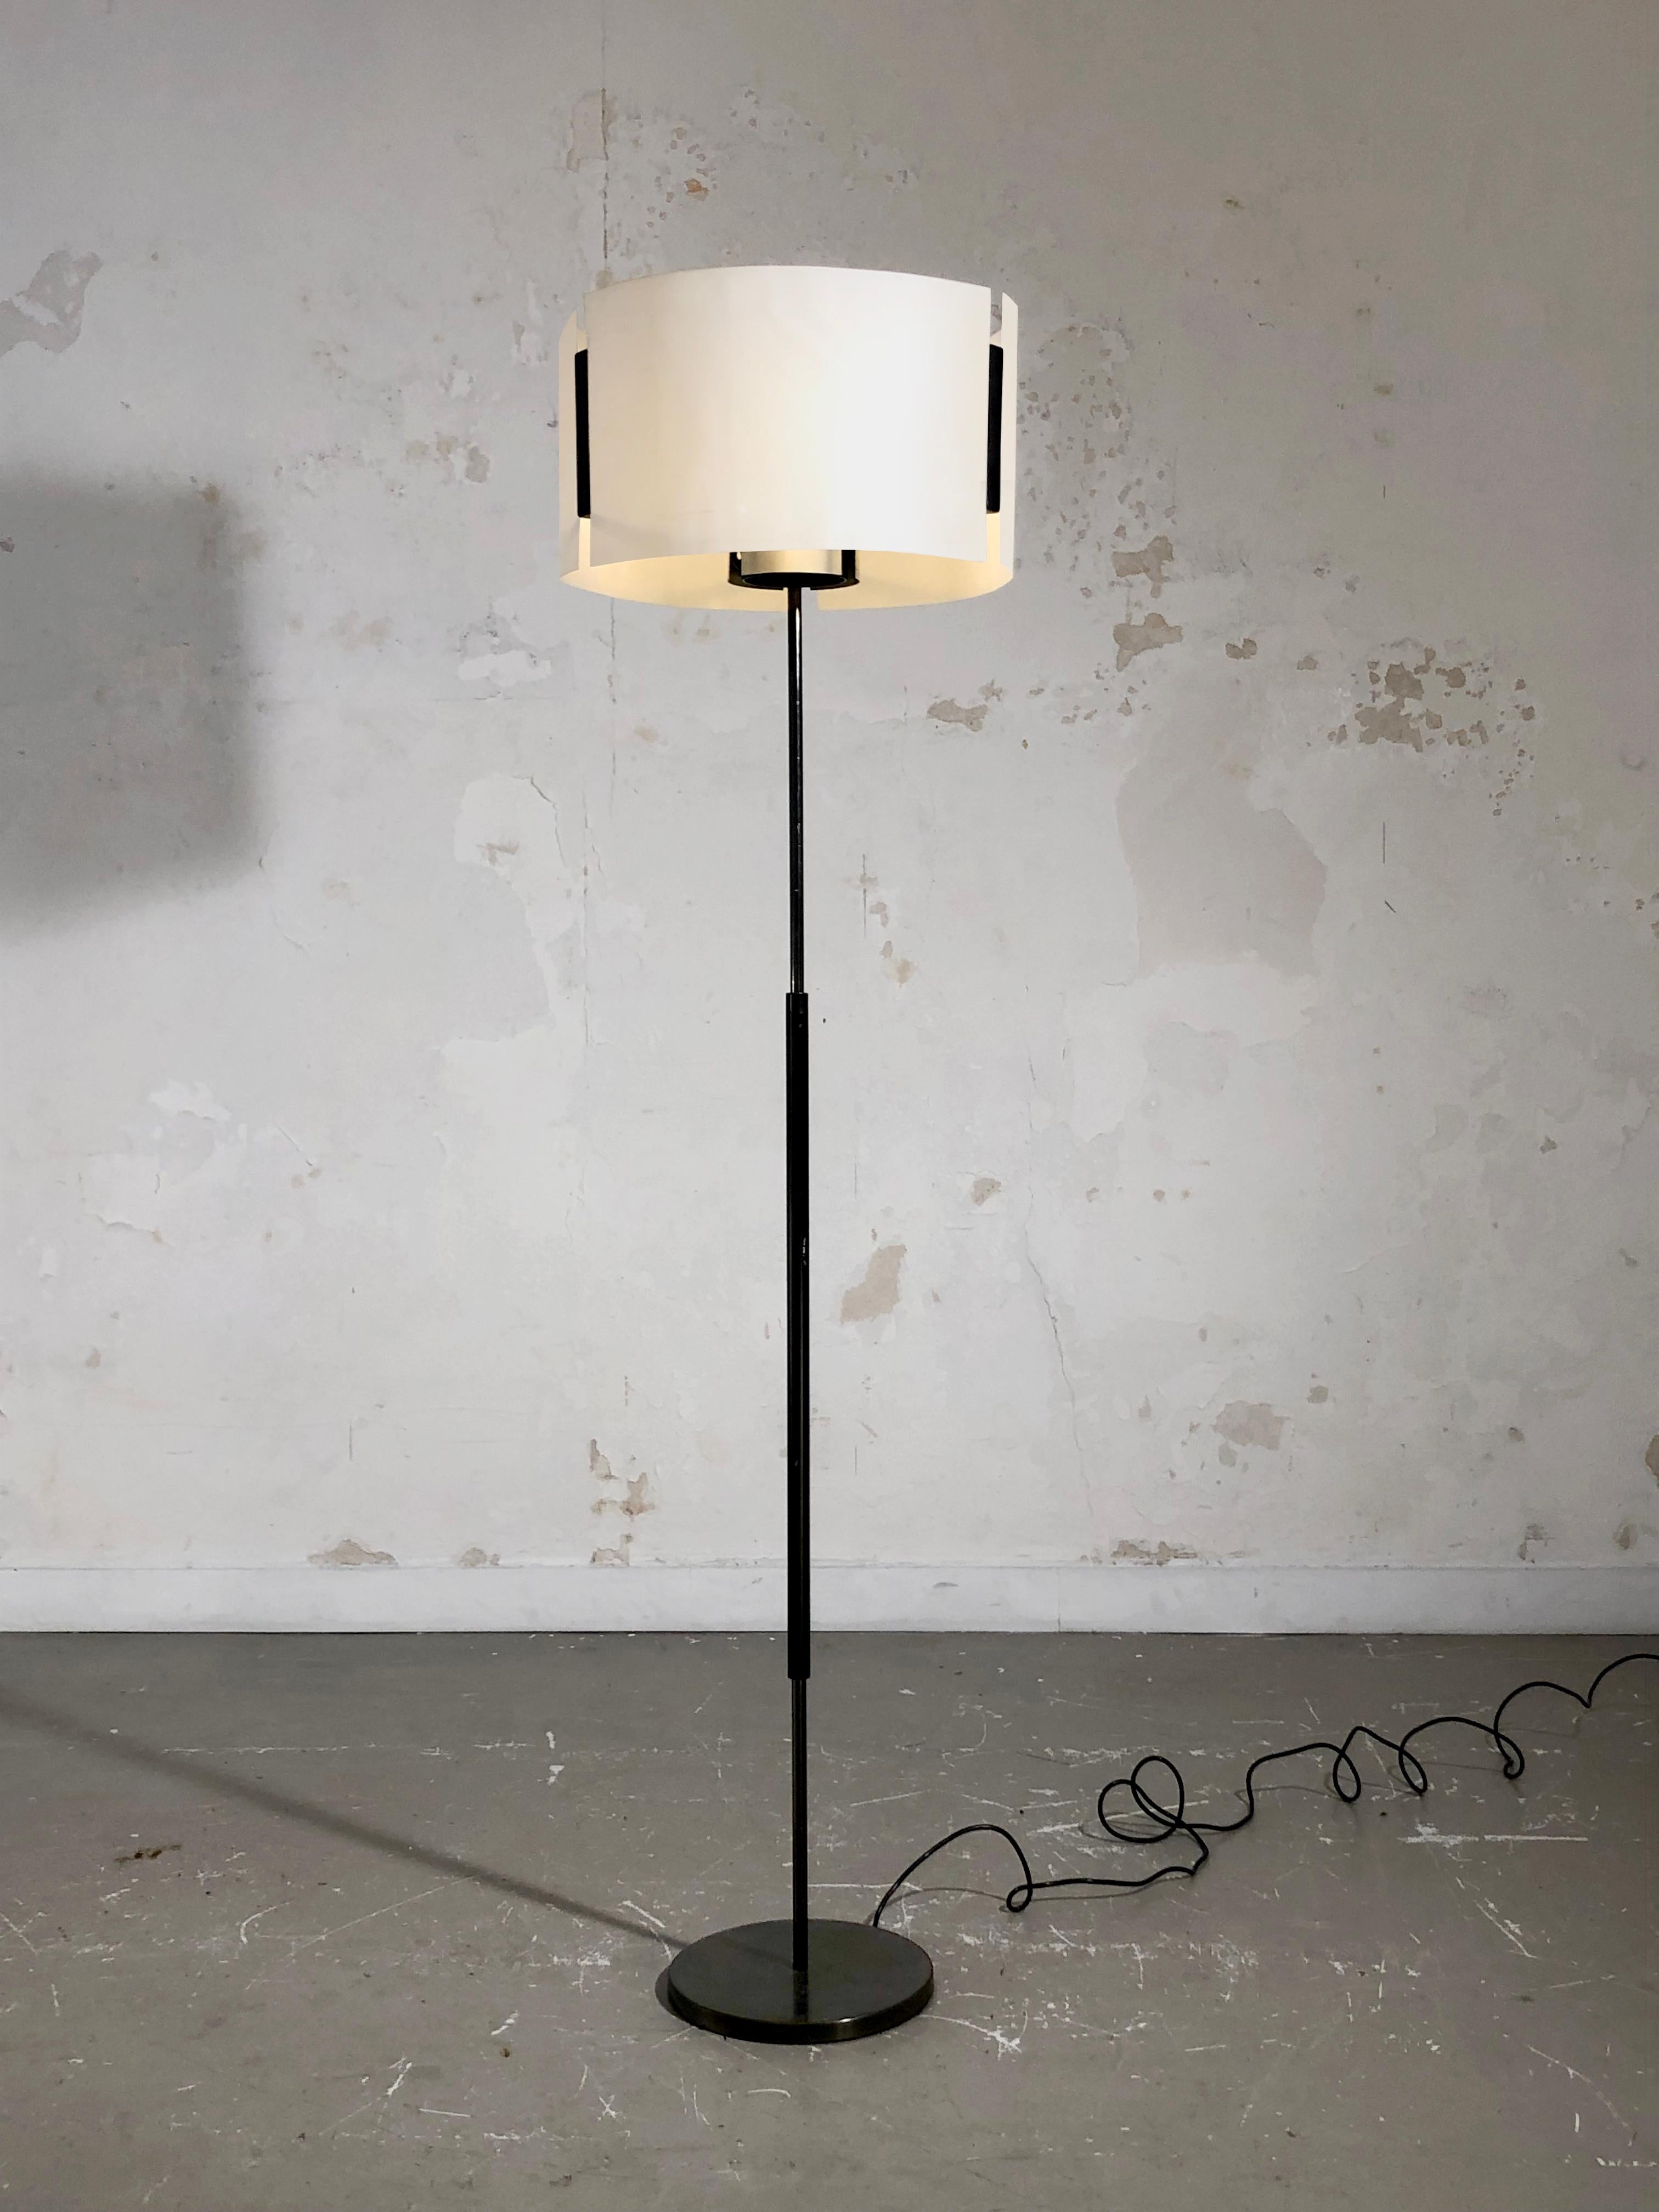 A MID-CENTURY-MODERN MODERNIST FLOOR LAMP by OSTUNI & FORTI, O-LUCE, Italy, 1960 For Sale 1